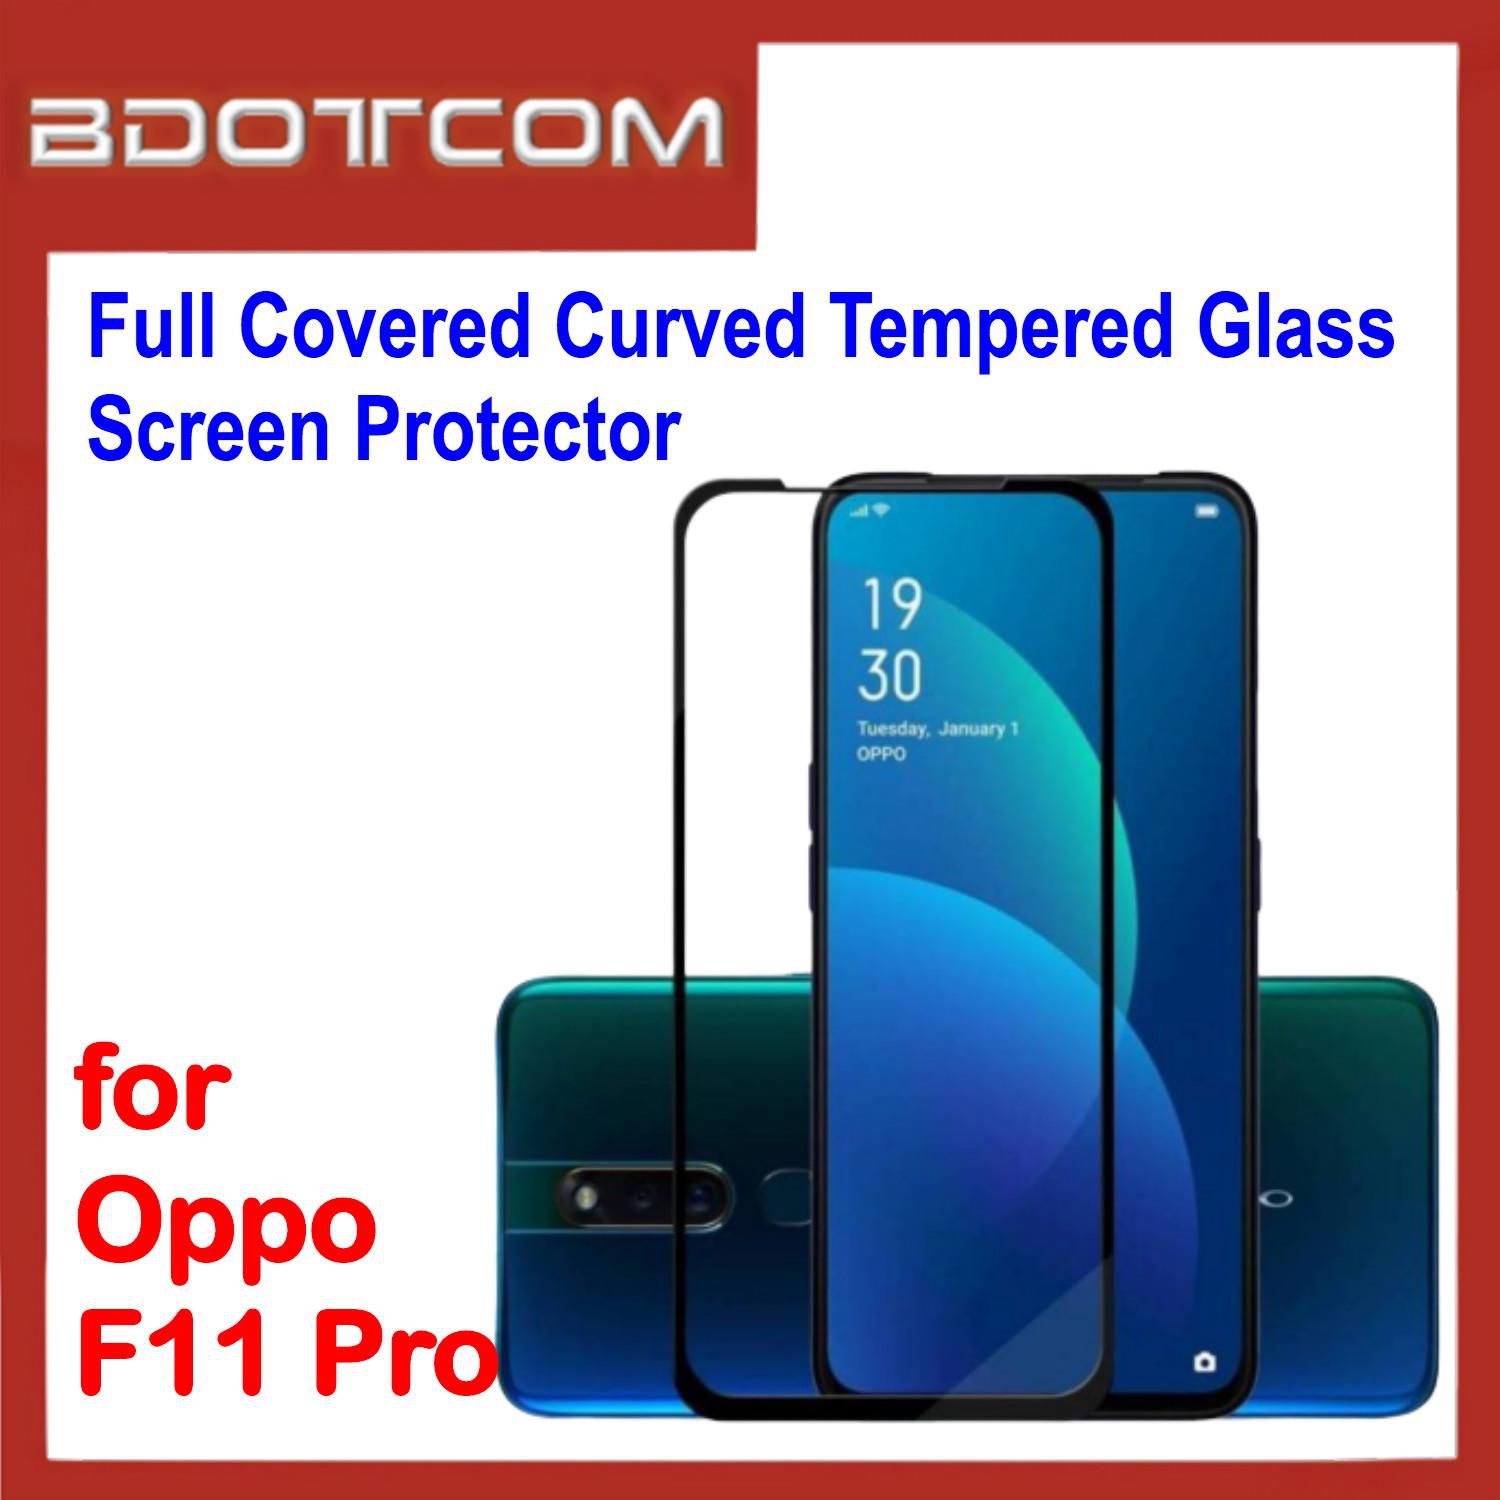 Bdotcom Full Covered Curved Glass Screen Protector for Oppo F11 Pro (Black)